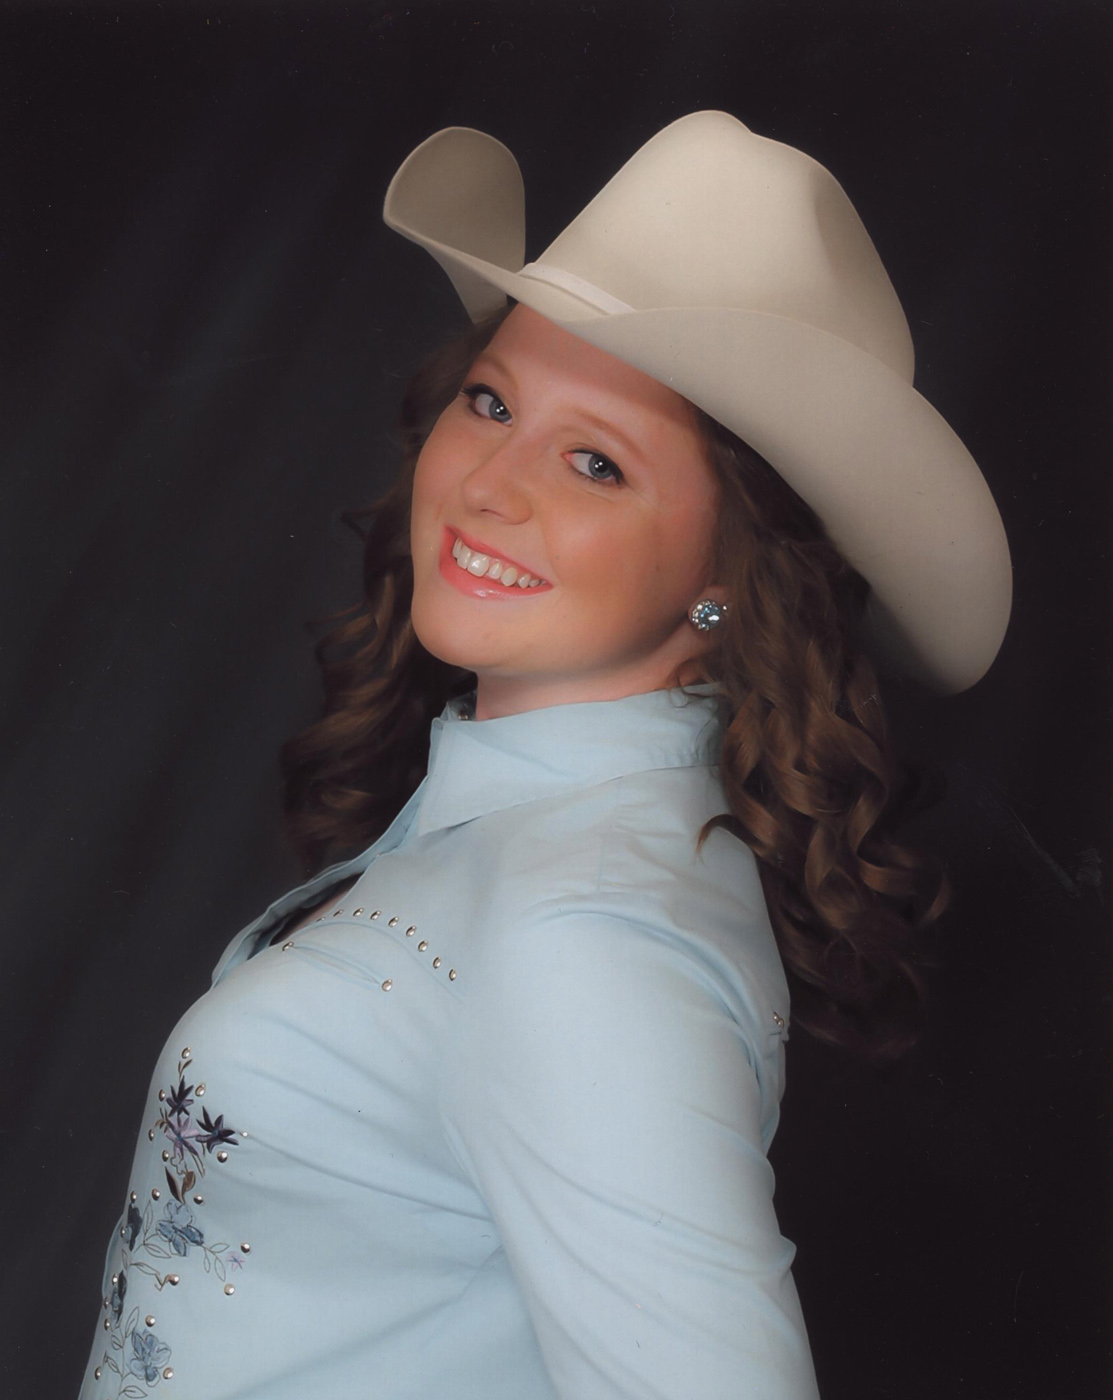 Courtesy of Vancouver Rodeo
Brittney Williams, 17, of Woodland was selected as the 2013 Vancouver Rodeo 	queen.